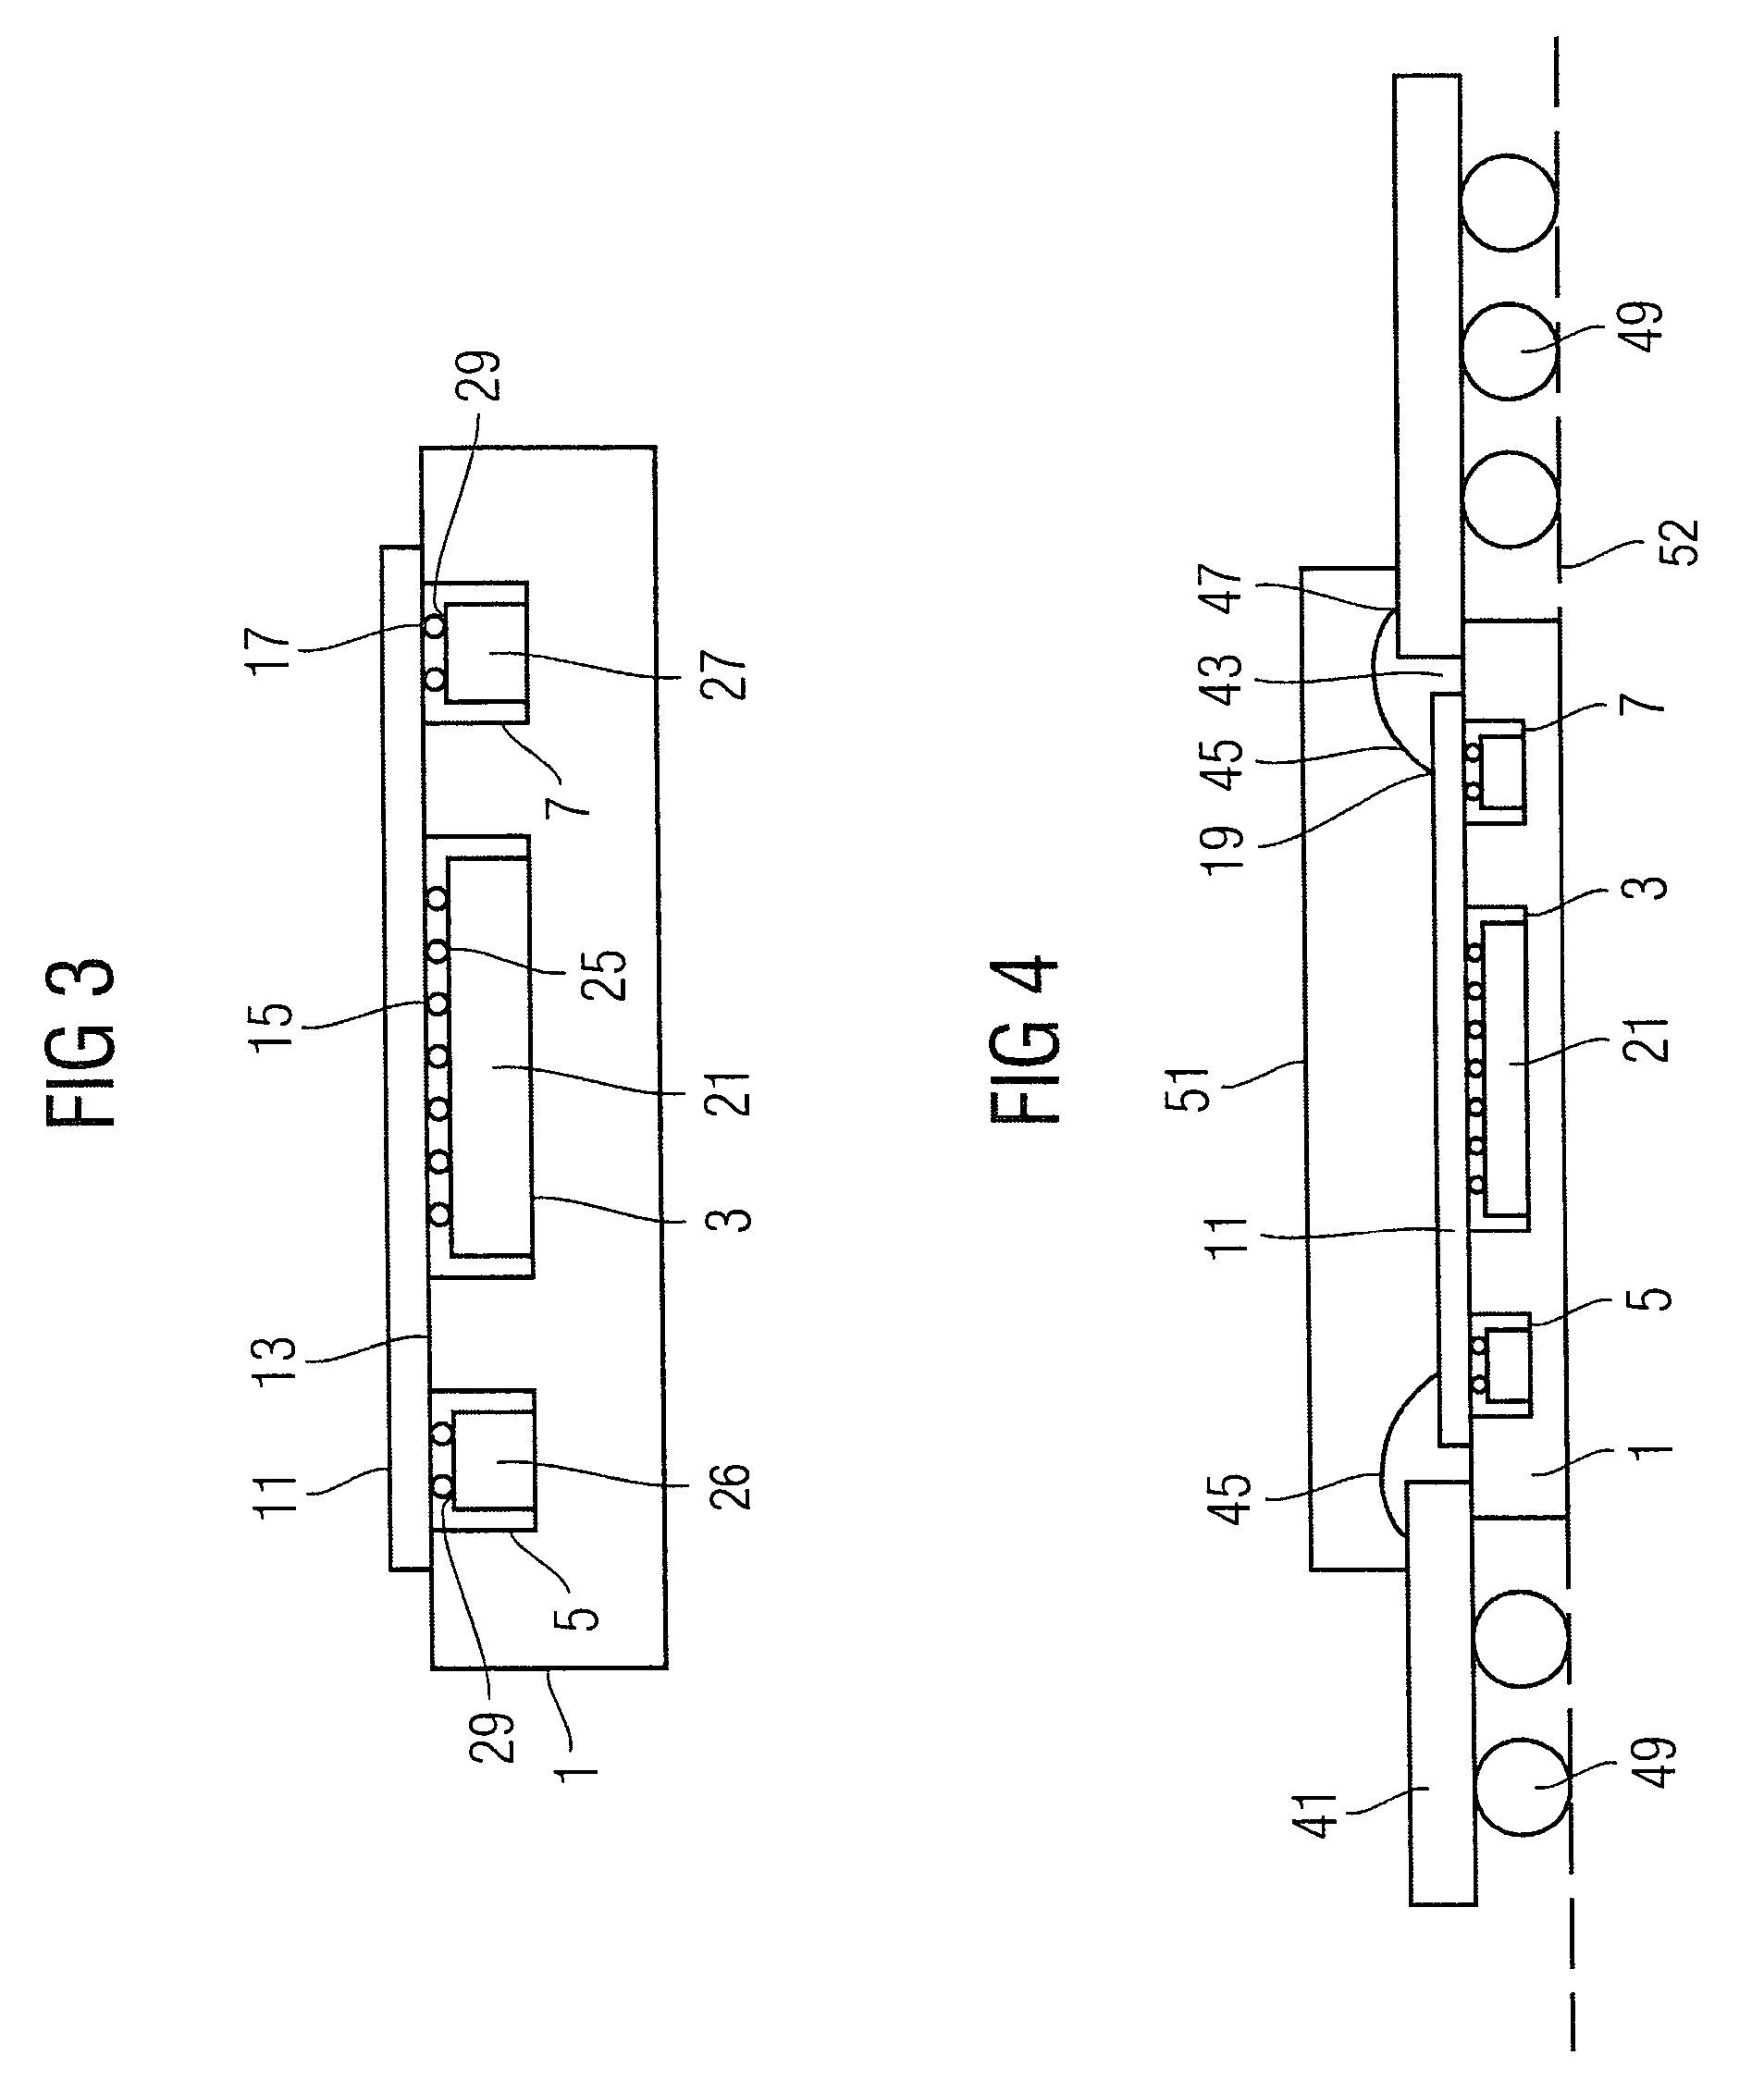 Integrated circuit package employing a heat-spreader member